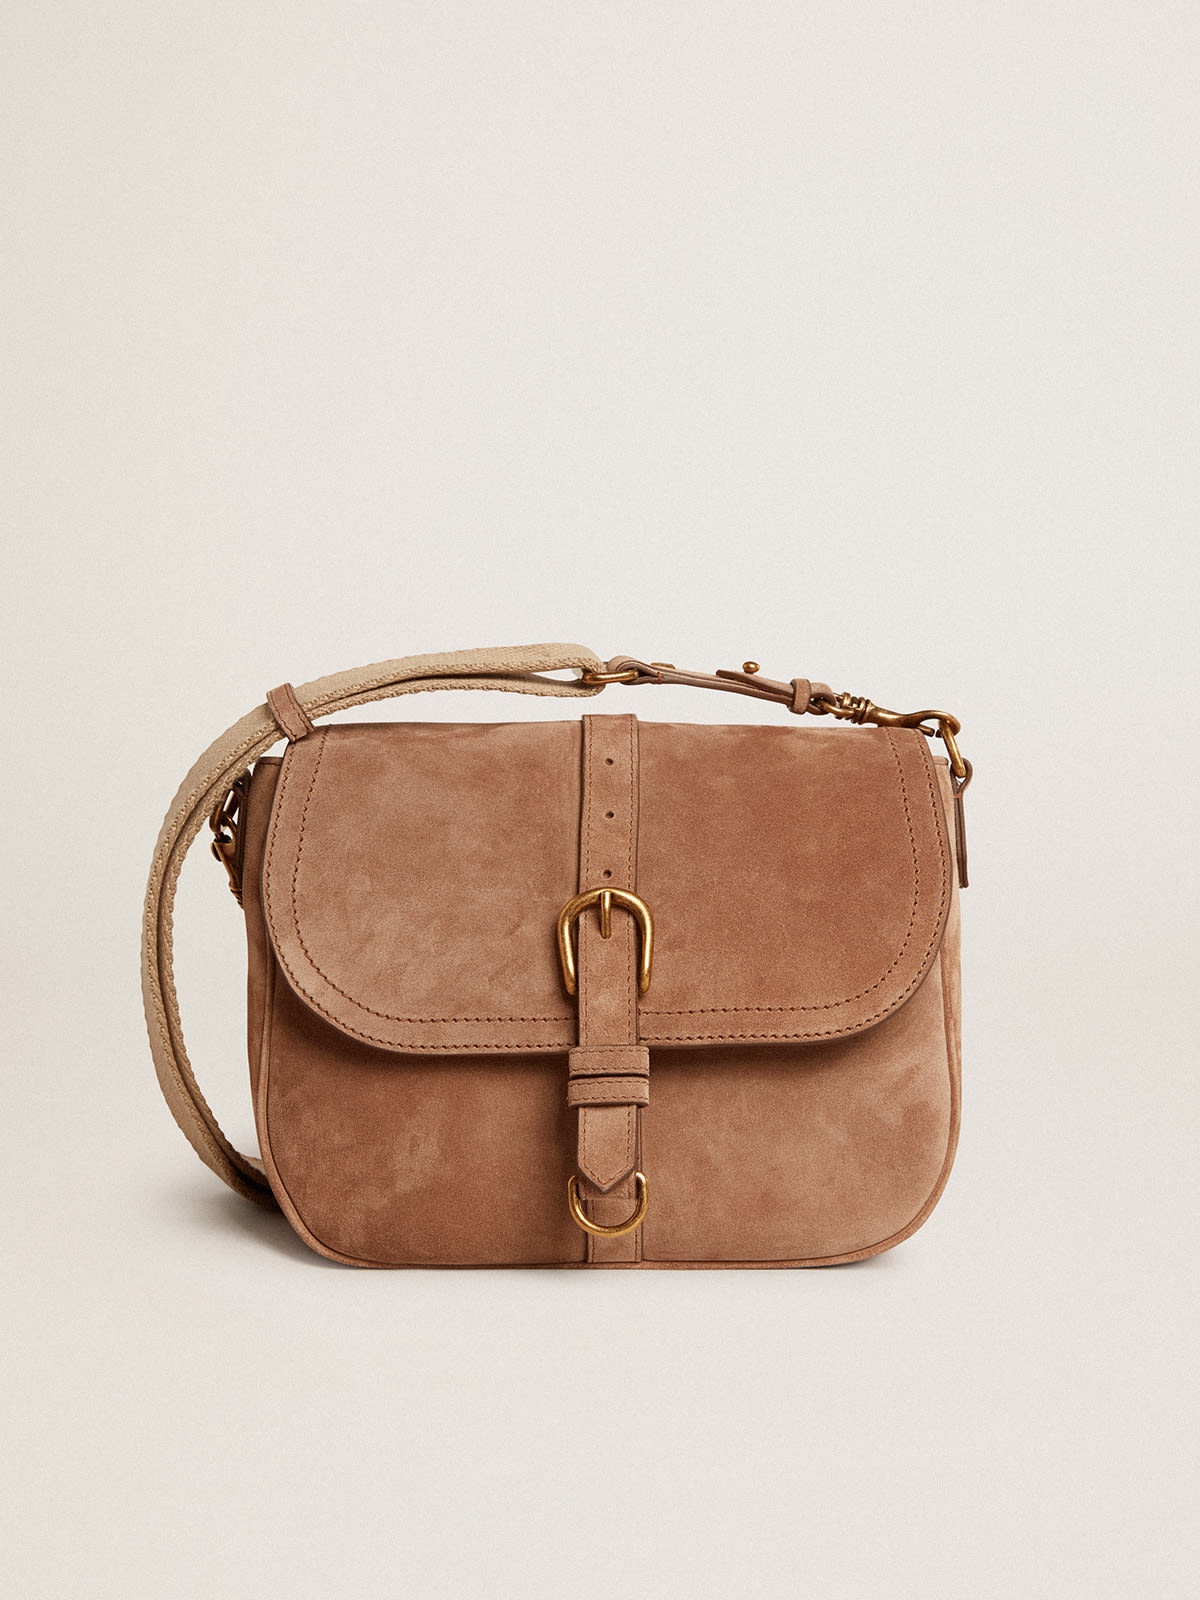 Medium Sally Bag in ash-colored suede with contrasting buckle and shoulder strap - 1